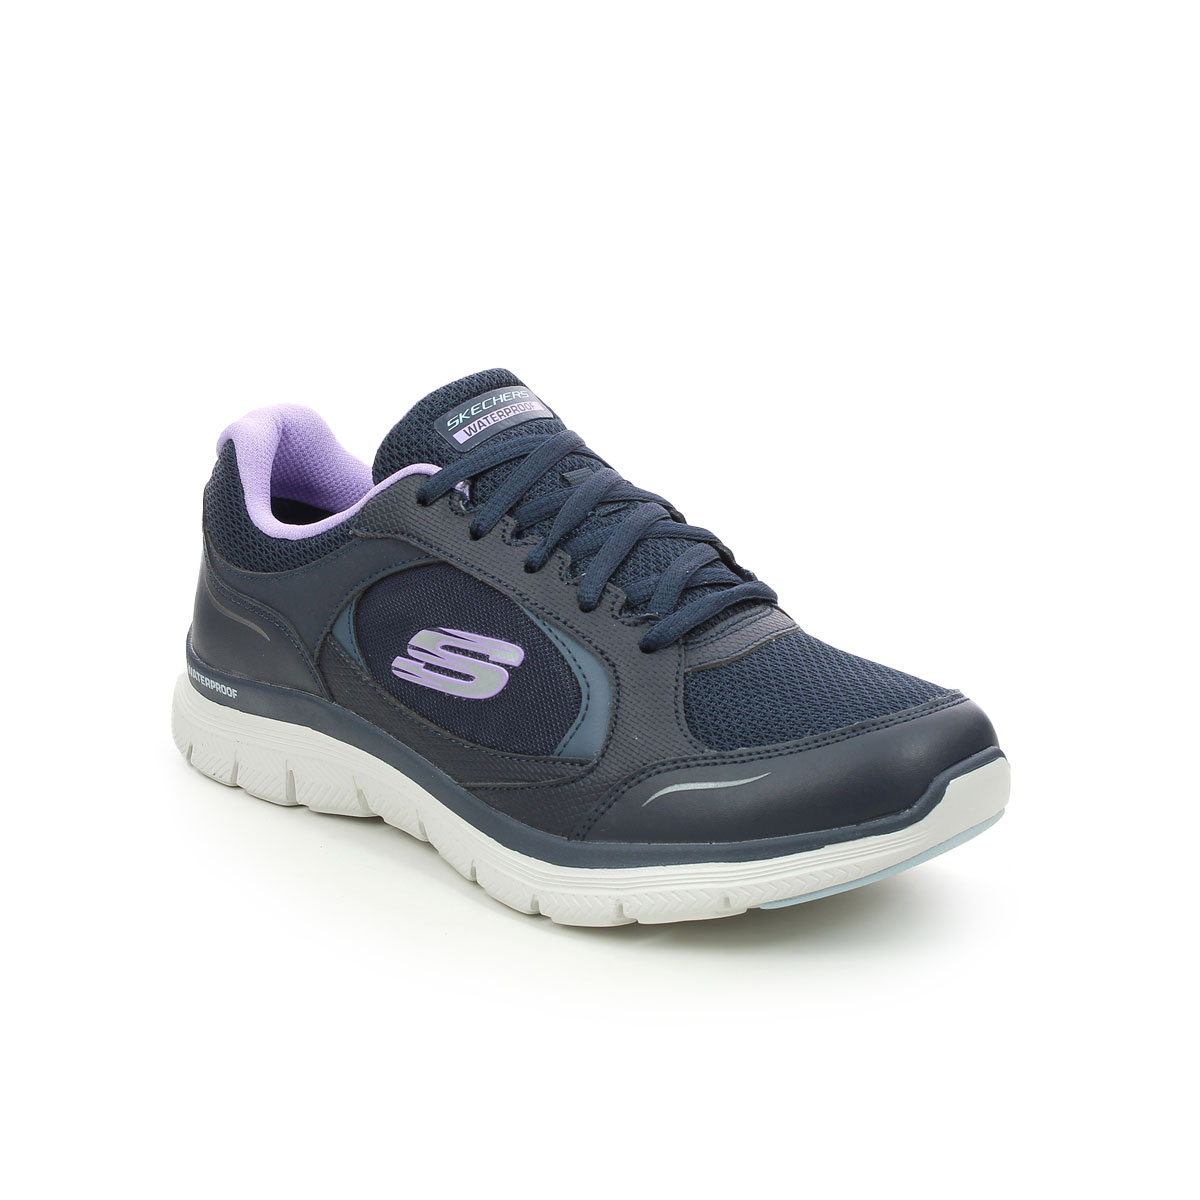 Skechers Flex Appeal Tex NVLV Navy Lavender Womens trainers 149299 in a Plain Leather and Man-made in Size 3